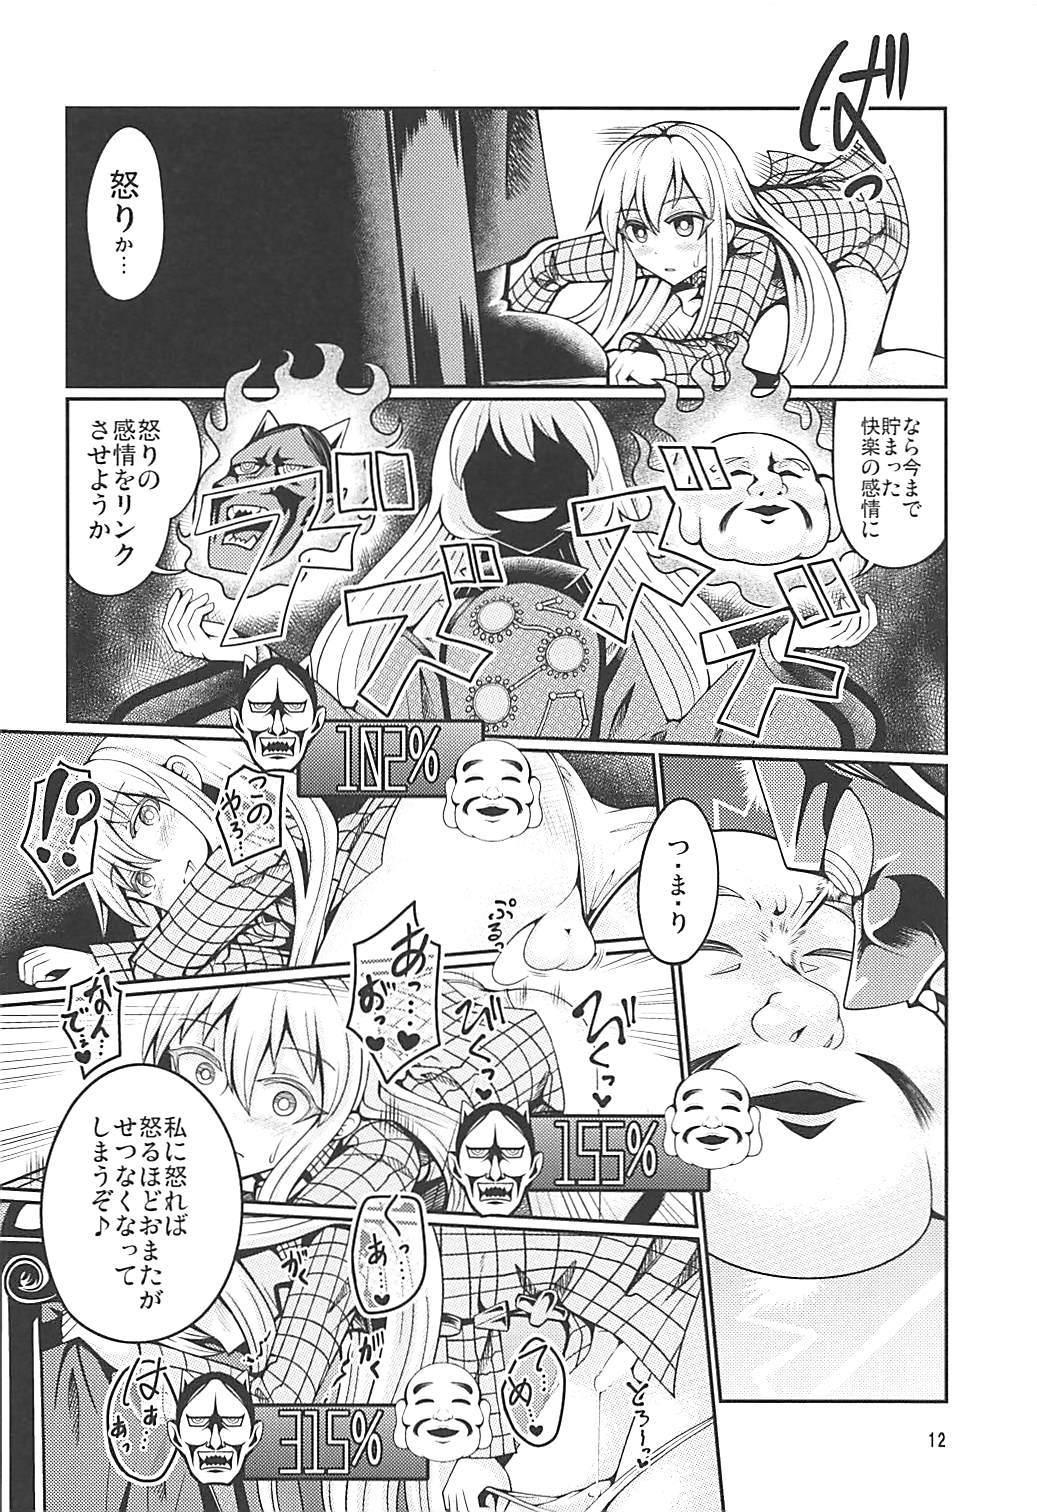 Snatch Reverse Sexuality 7 - Touhou project Transsexual - Page 11